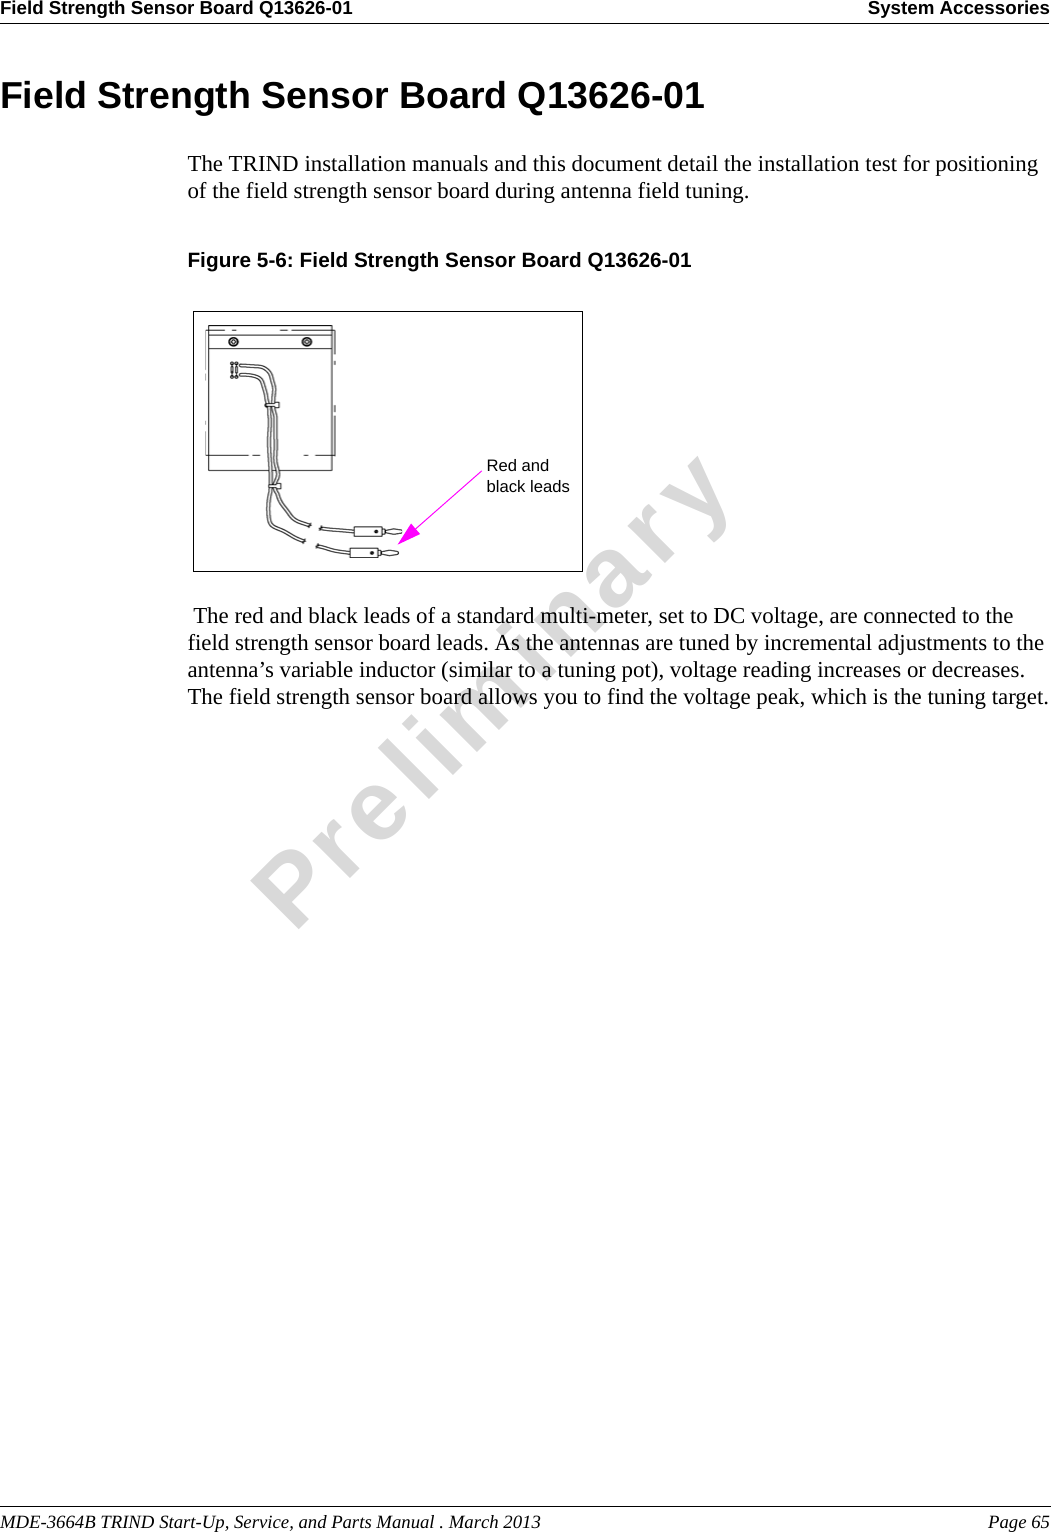 MDE-3664B TRIND Start-Up, Service, and Parts Manual . March 2013 Page 65Field Strength Sensor Board Q13626-01 System AccessoriesPreliminaryField Strength Sensor Board Q13626-01The TRIND installation manuals and this document detail the installation test for positioning of the field strength sensor board during antenna field tuning.Figure 5-6: Field Strength Sensor Board Q13626-01 Red and black leads The red and black leads of a standard multi-meter, set to DC voltage, are connected to the field strength sensor board leads. As the antennas are tuned by incremental adjustments to the antenna’s variable inductor (similar to a tuning pot), voltage reading increases or decreases. The field strength sensor board allows you to find the voltage peak, which is the tuning target.